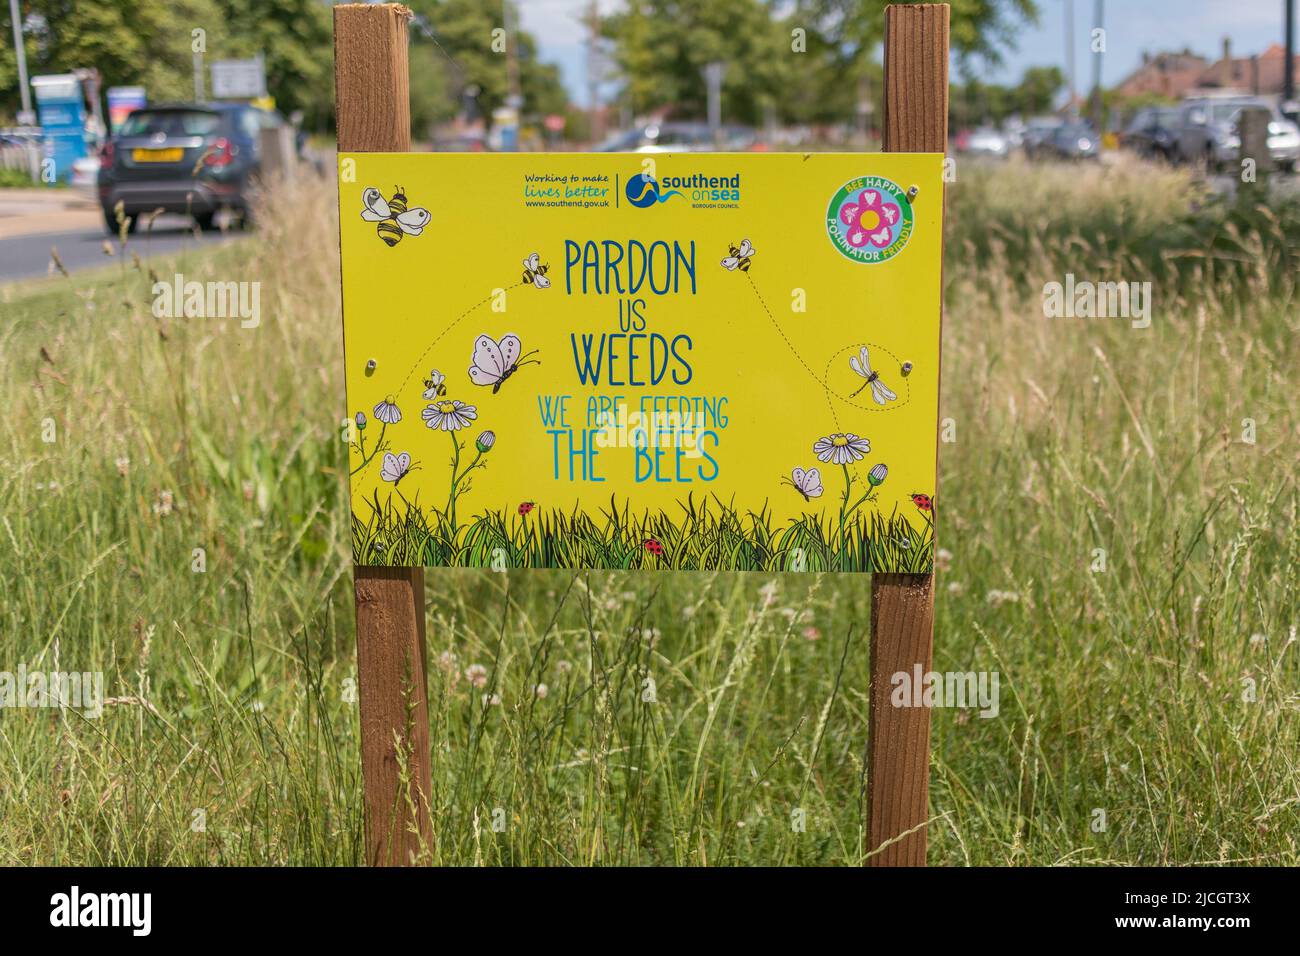 Southend on sea, UK. 13th June, 2022. Signs in a central reservation, pardon us weeds we are feeding the bees, part of a rewilding campaign by Southend on Sea Borough Council. Penelope Barritt/Alamy Live News Stock Photo